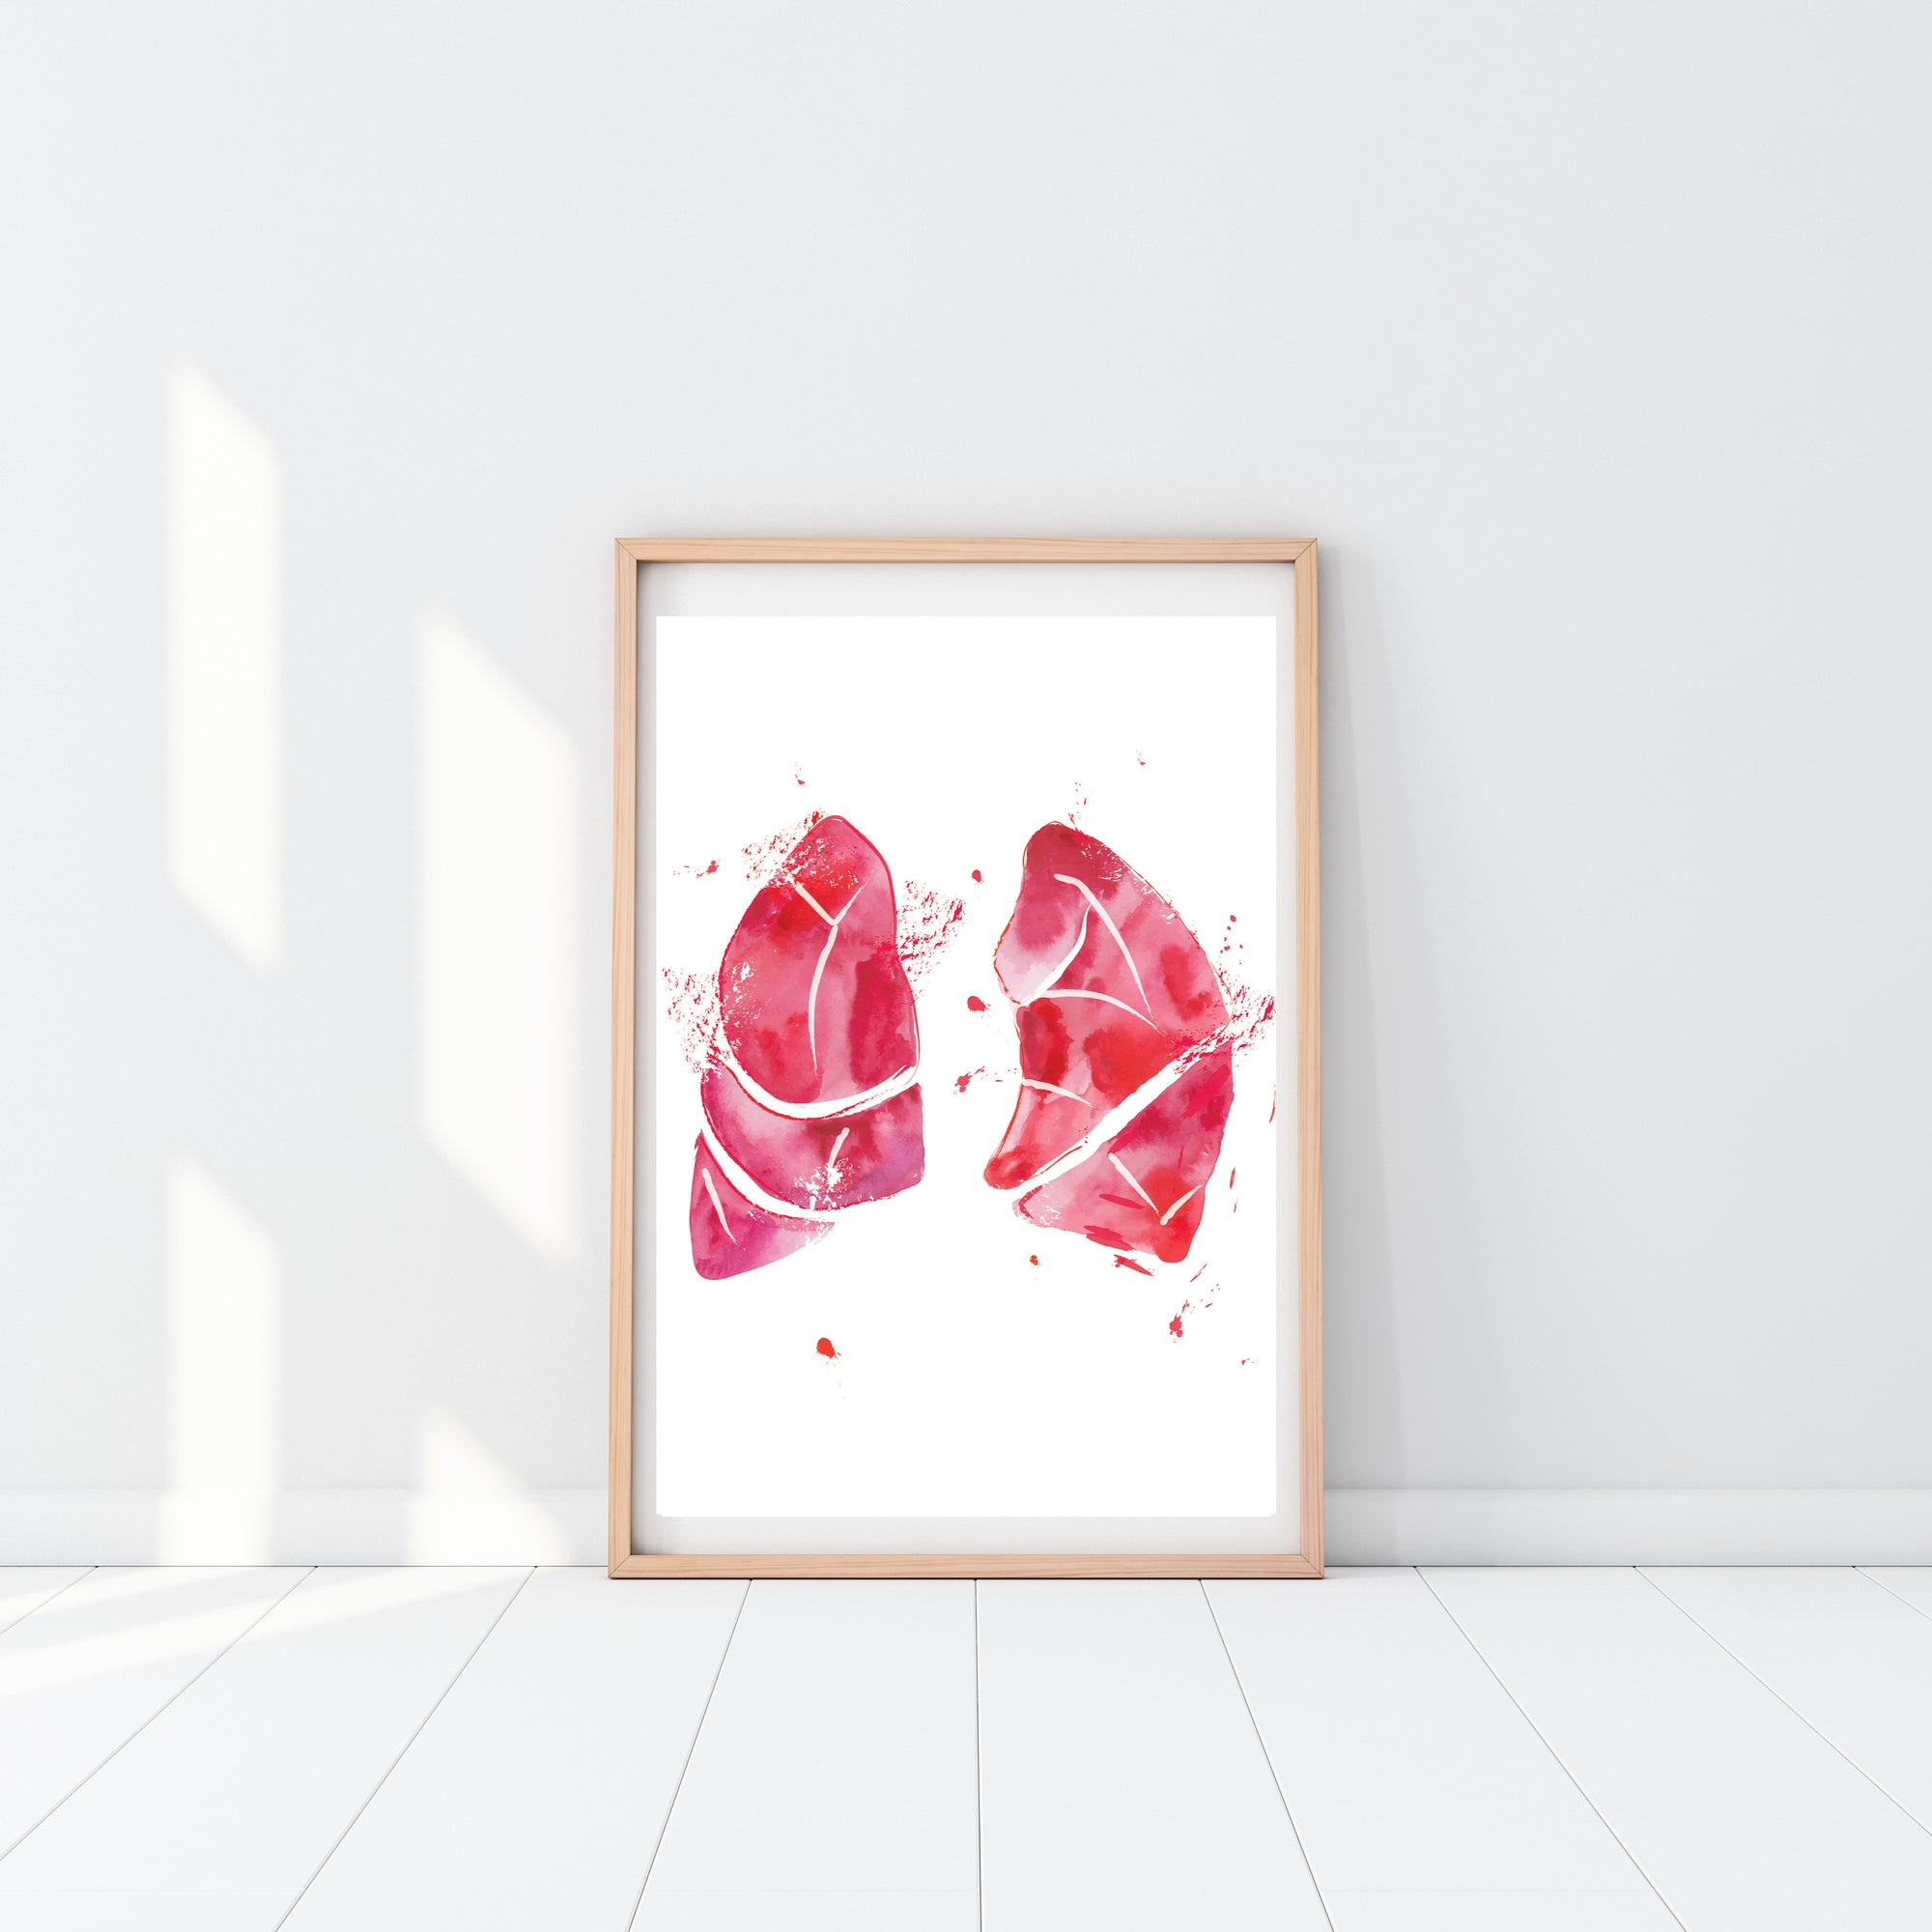 Lung Abstract Anatomy Art Print, Respiratory Therapy Wall Decor